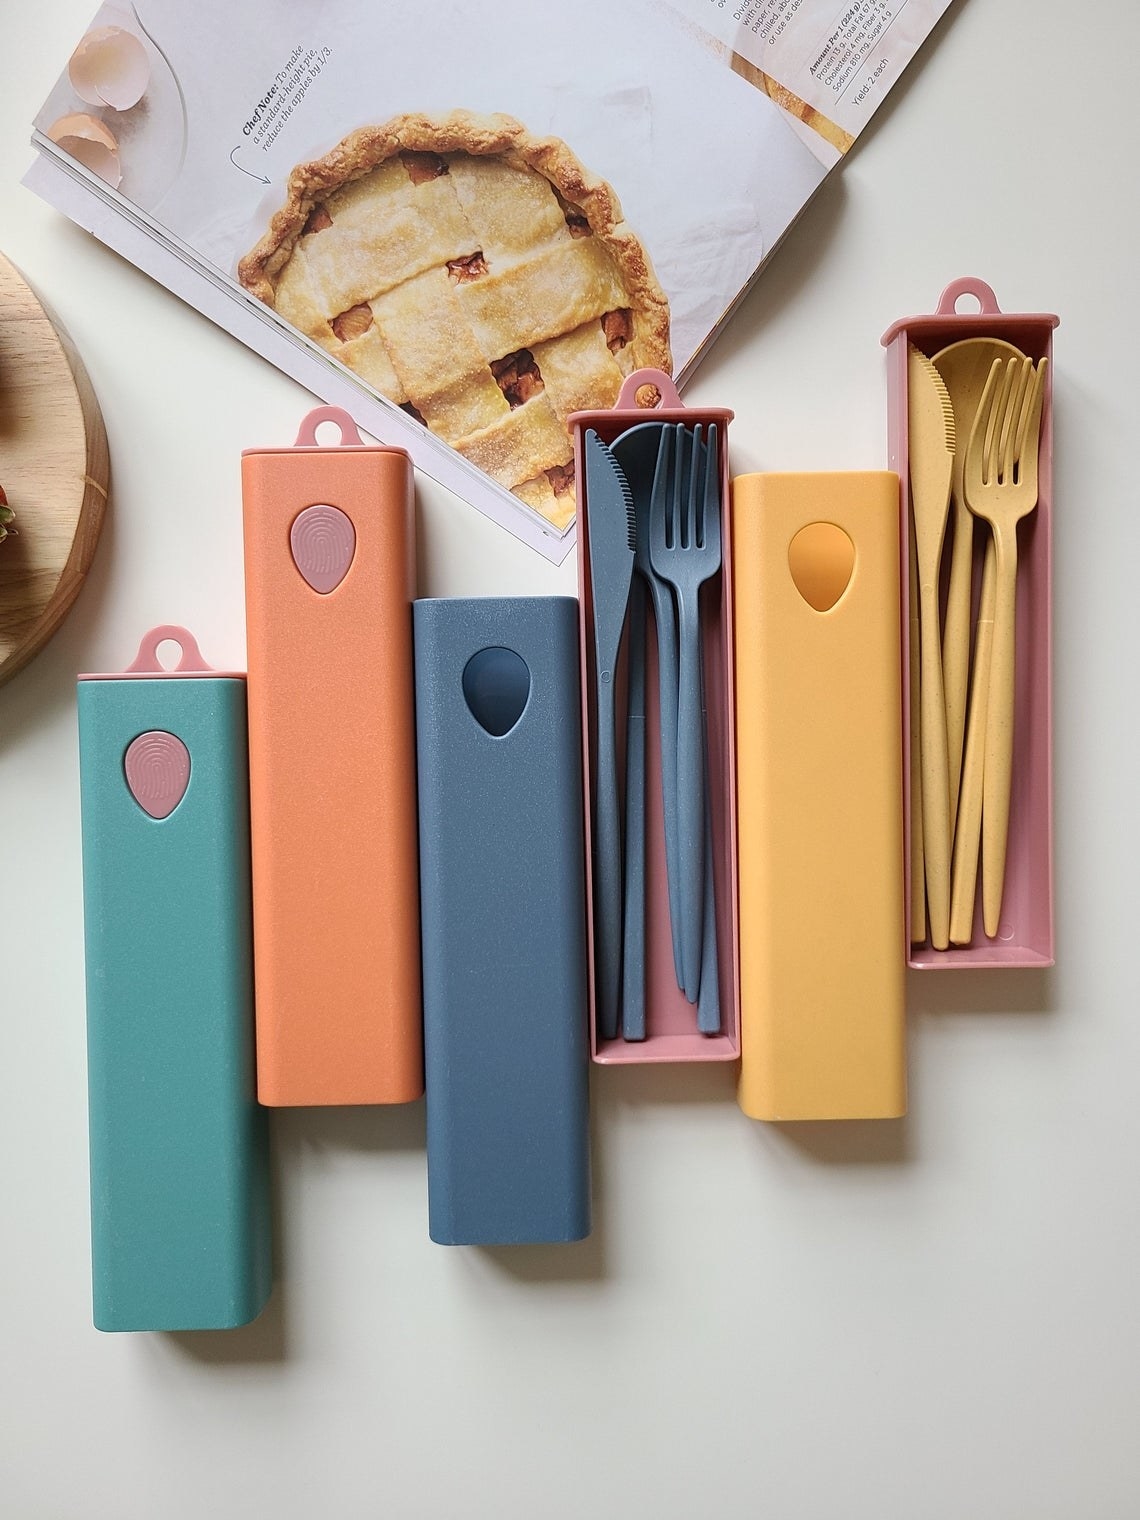 boxes in teal, orange, blue, and yellow; two are open, showing the utensil set